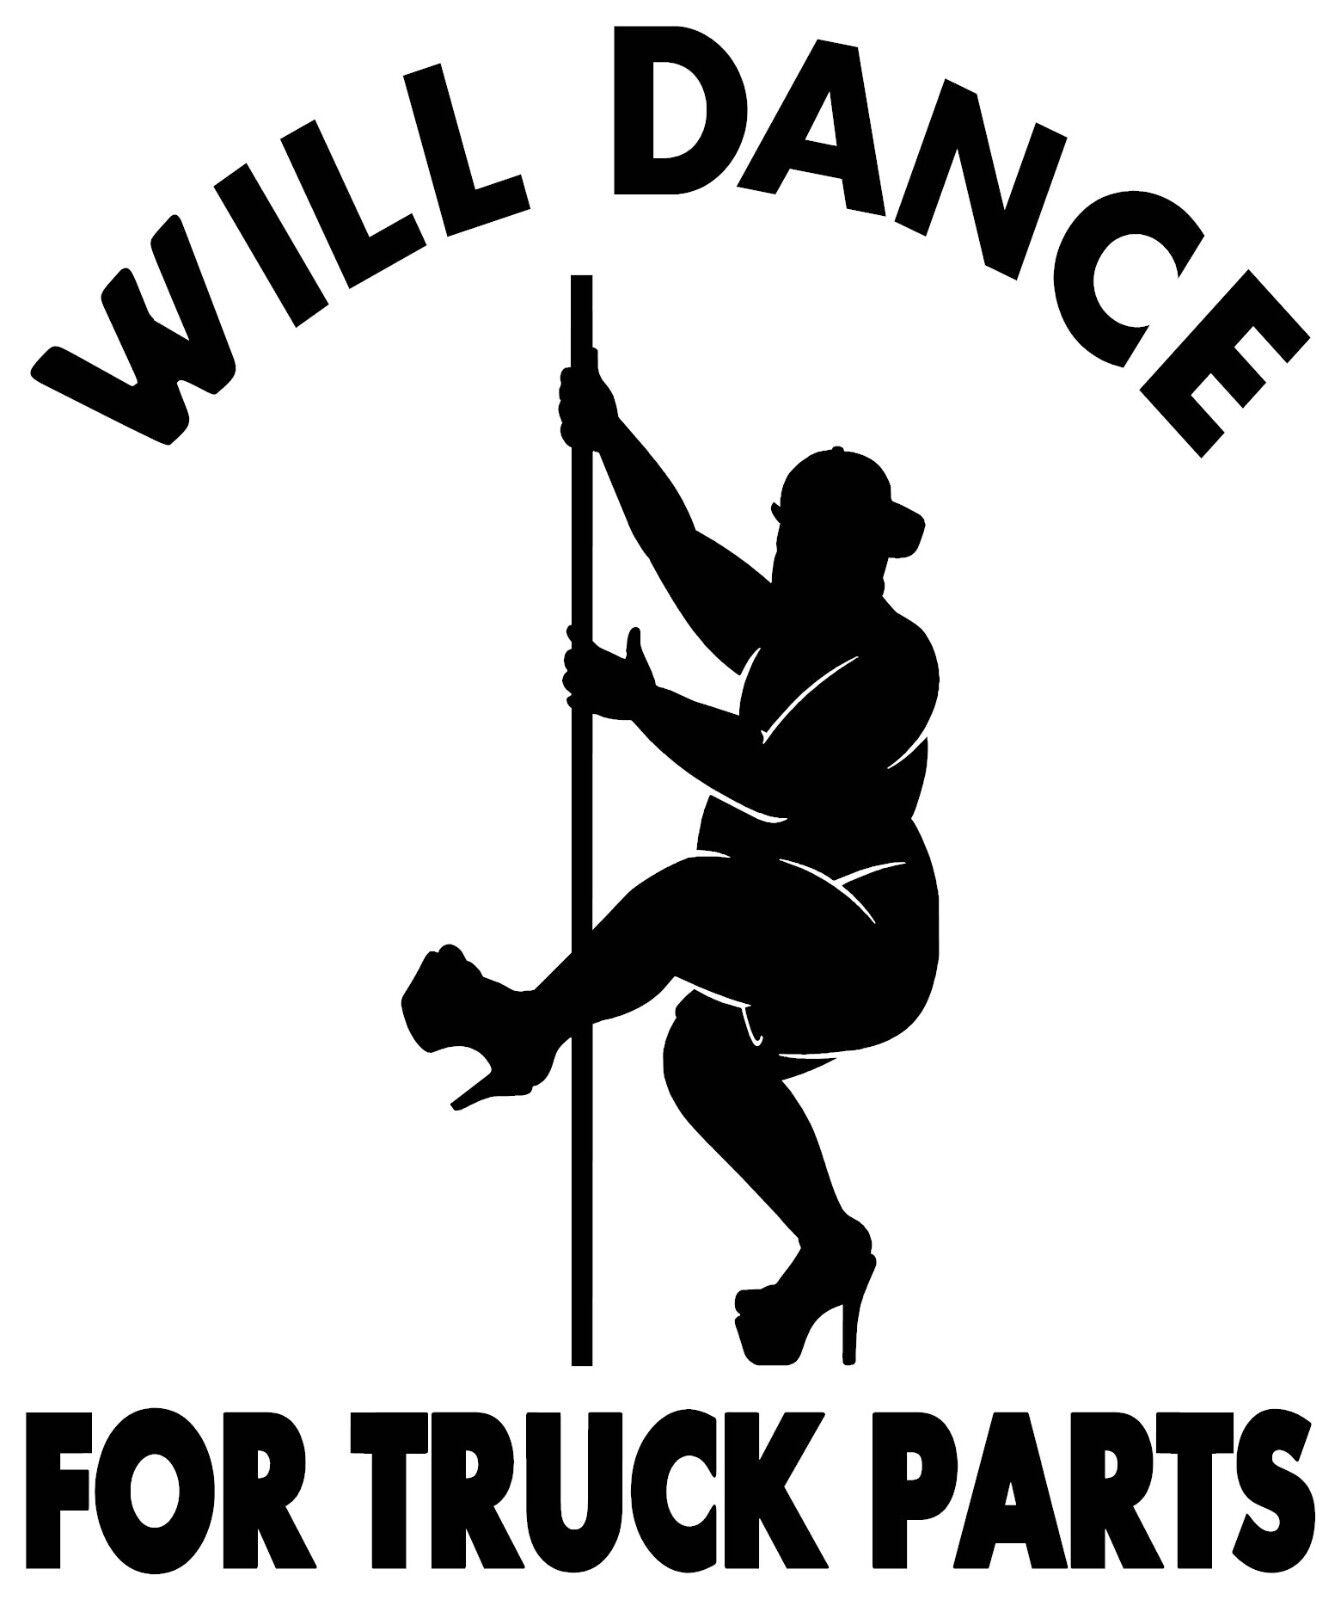 Will Dance For Truck Parts Vinyl Decal